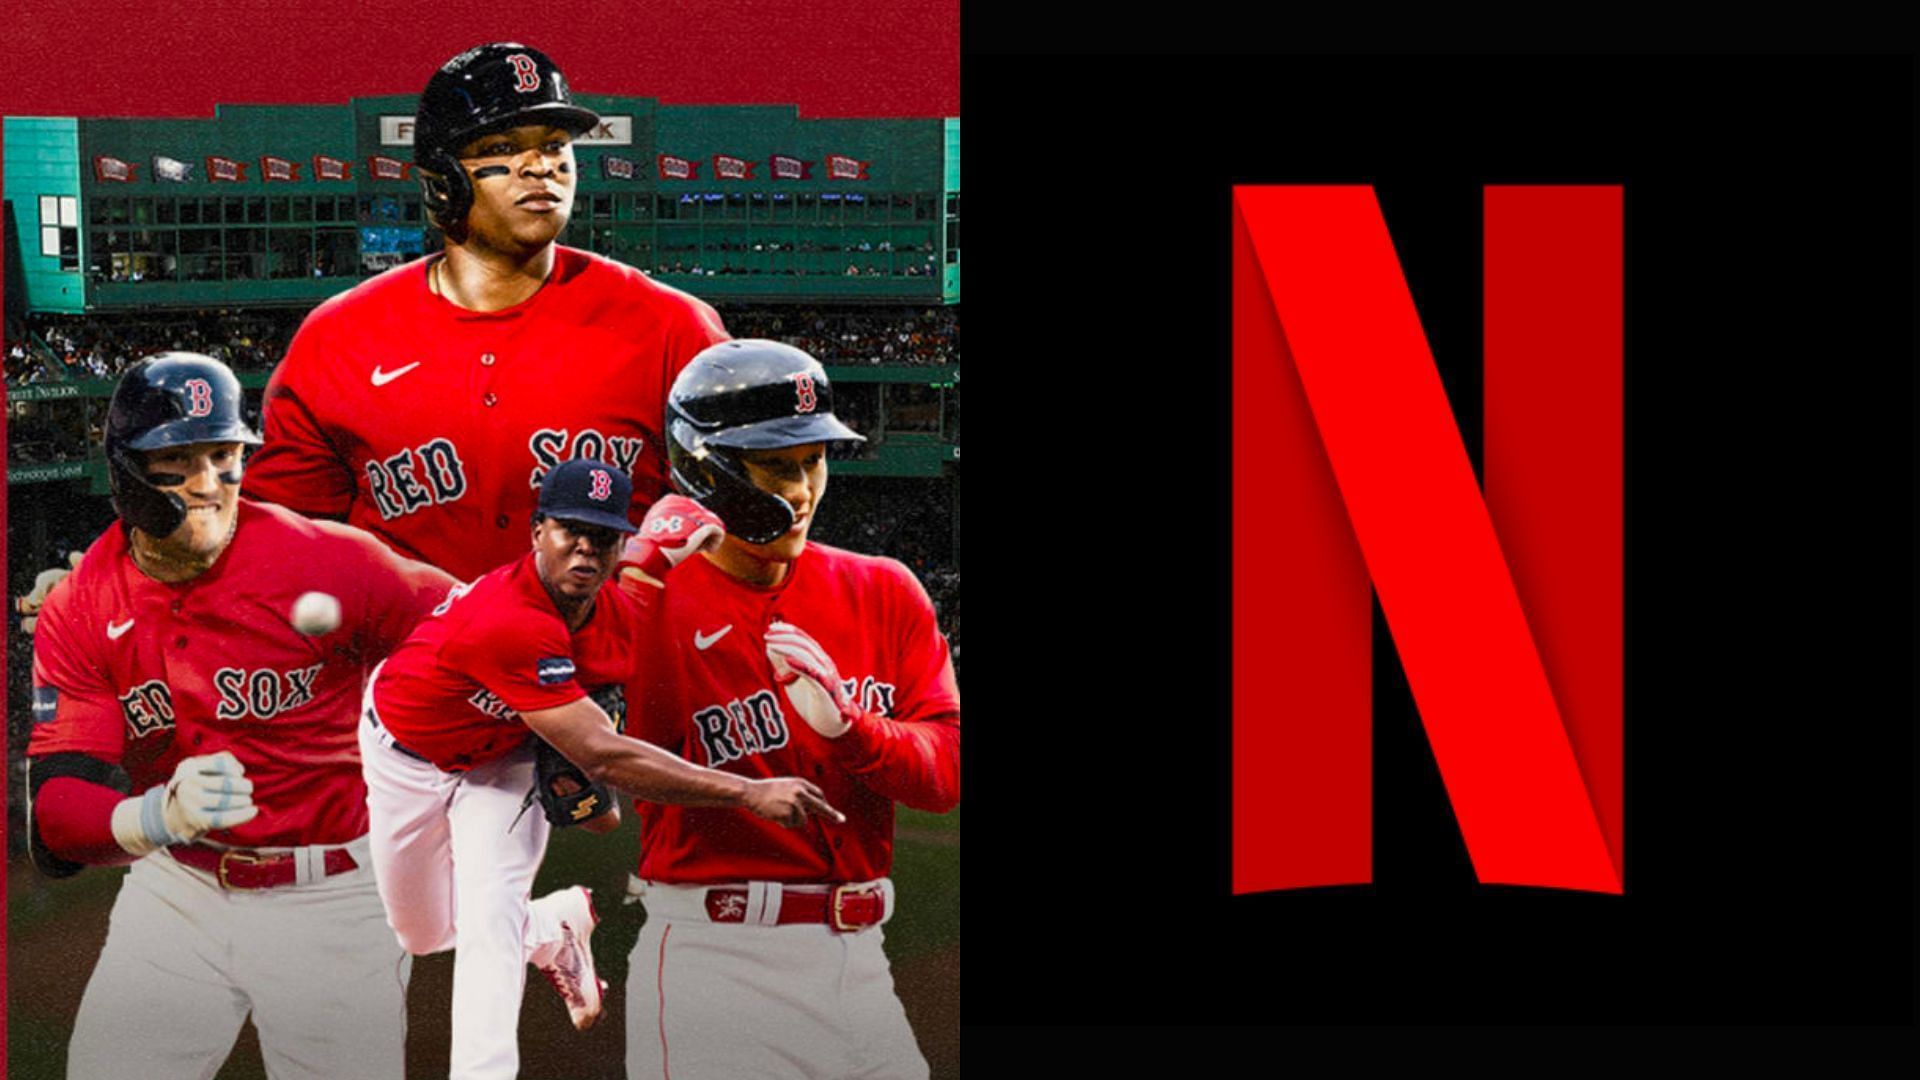 The Red Sox will be part of the Major League Baseball championships (Image via MLB and Netflix)